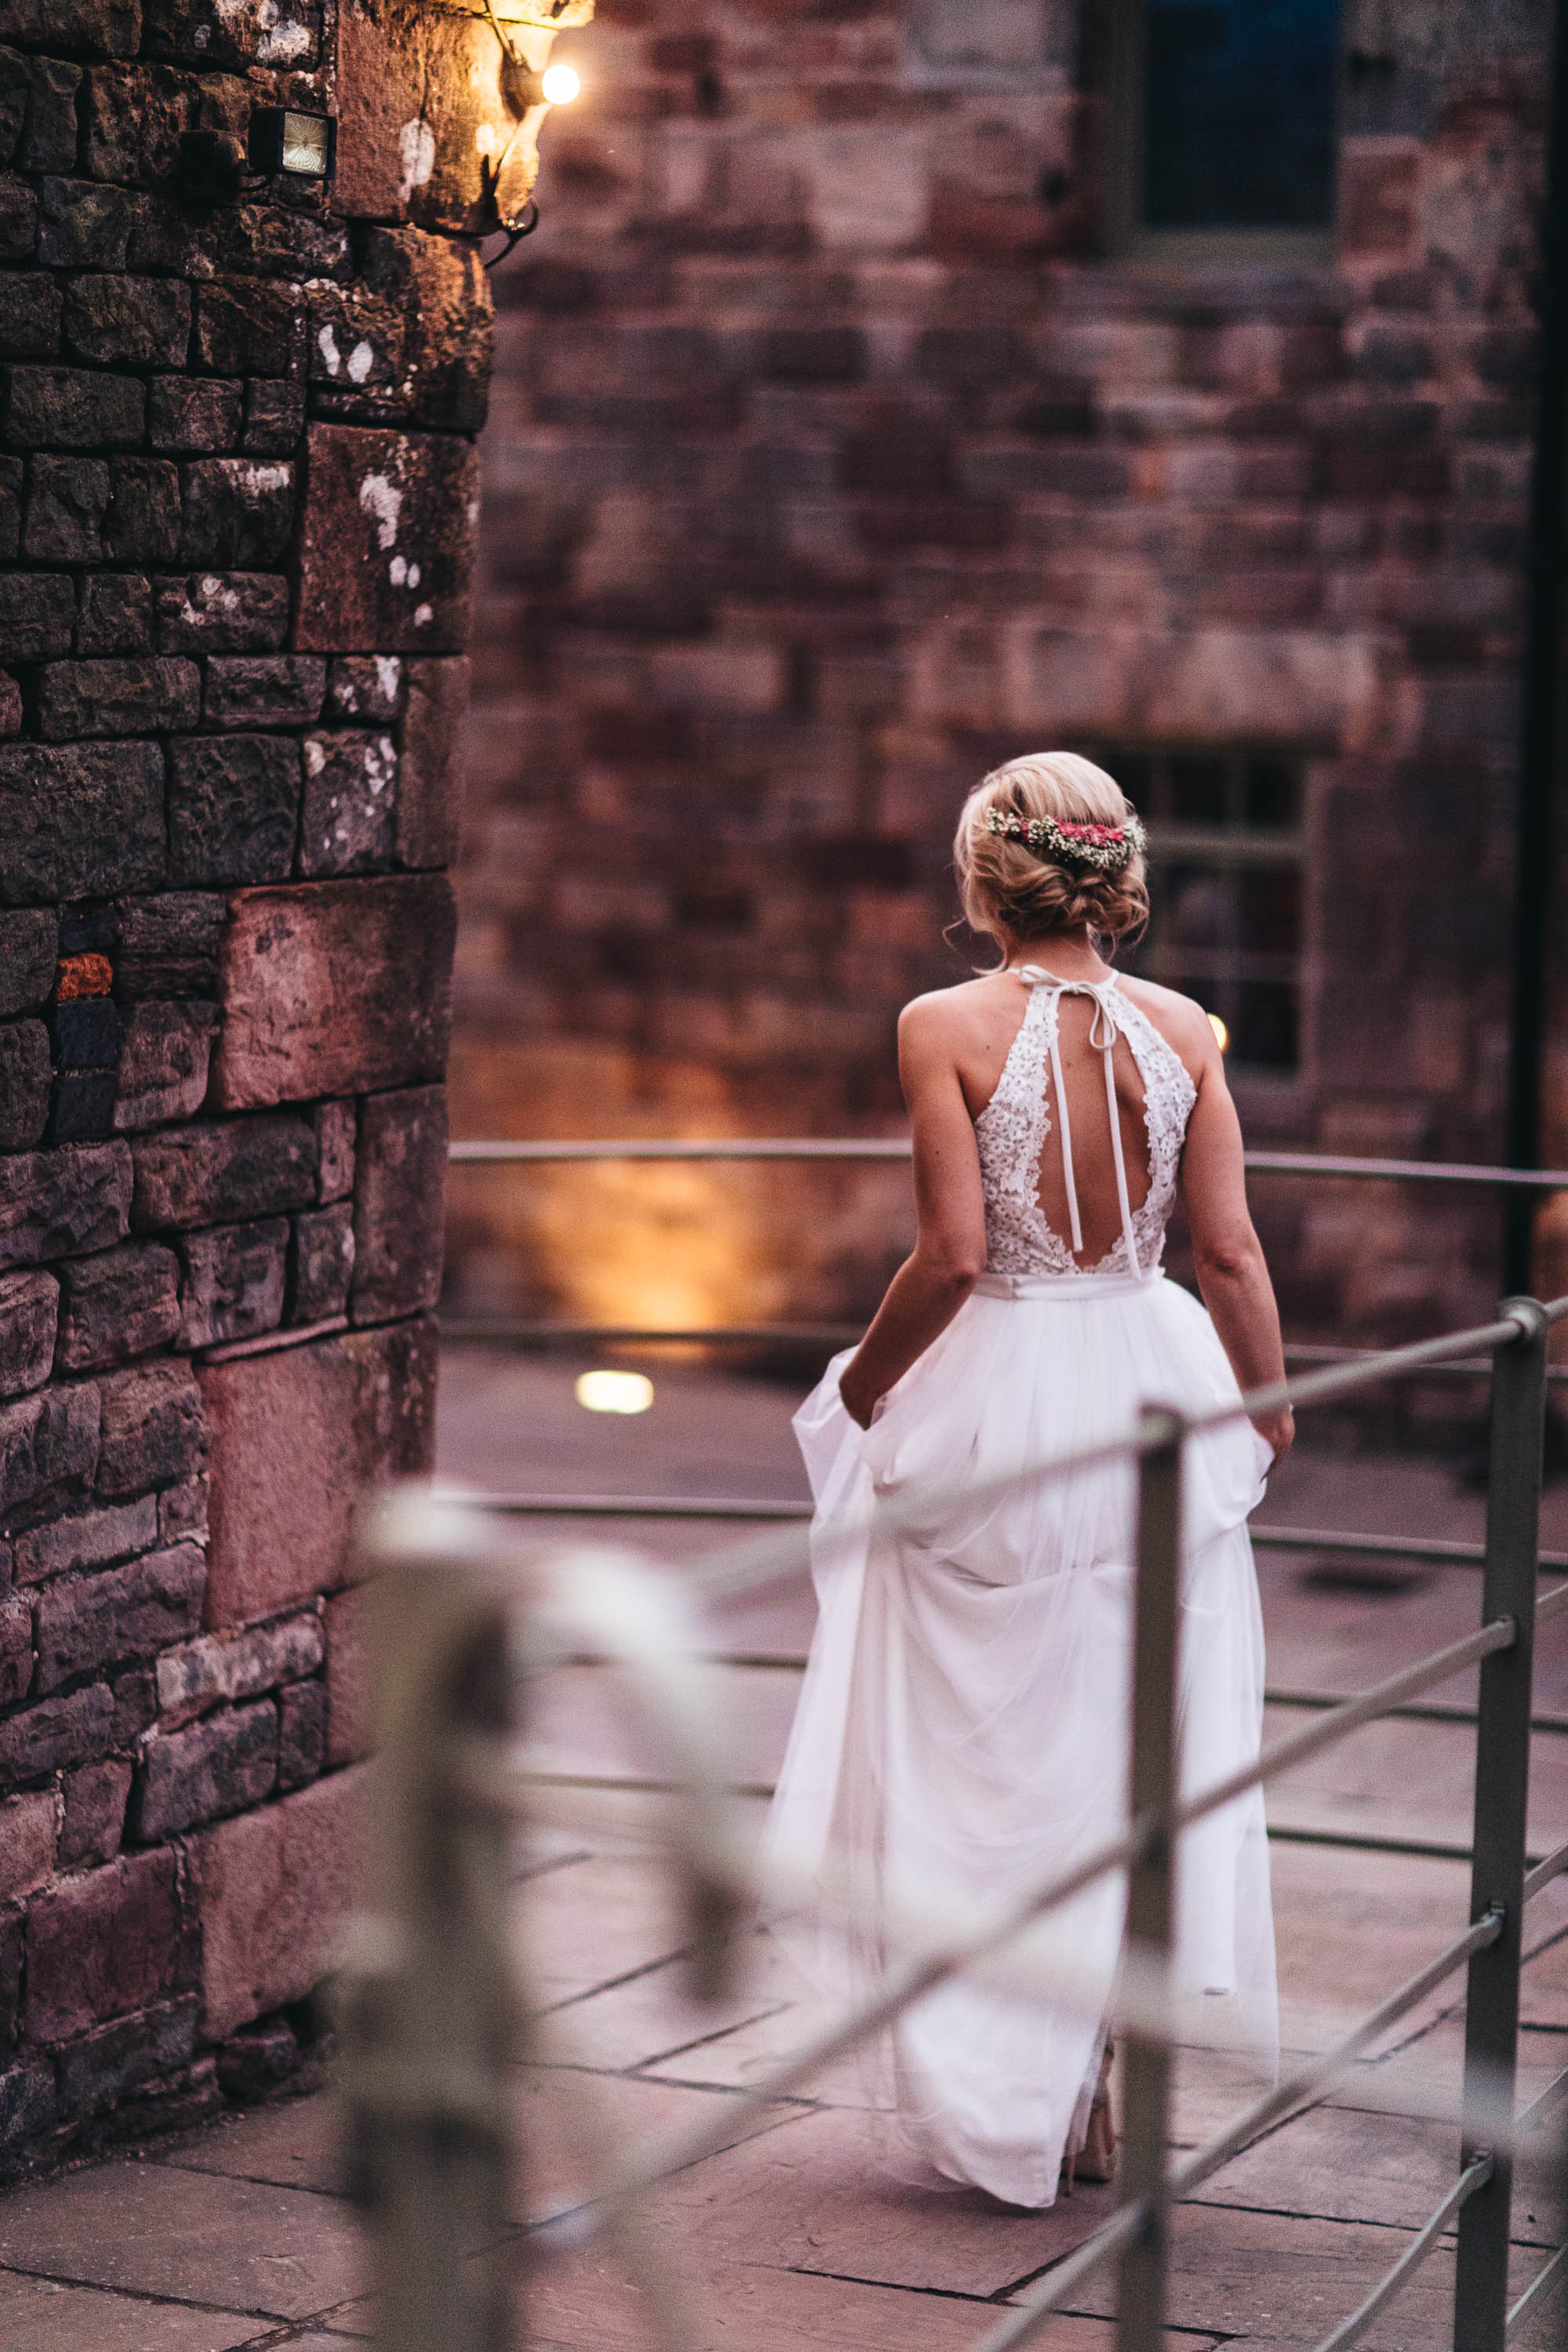 Shot to feature the back of Bride's wedding dress as she walks back inside the Wedding Barn